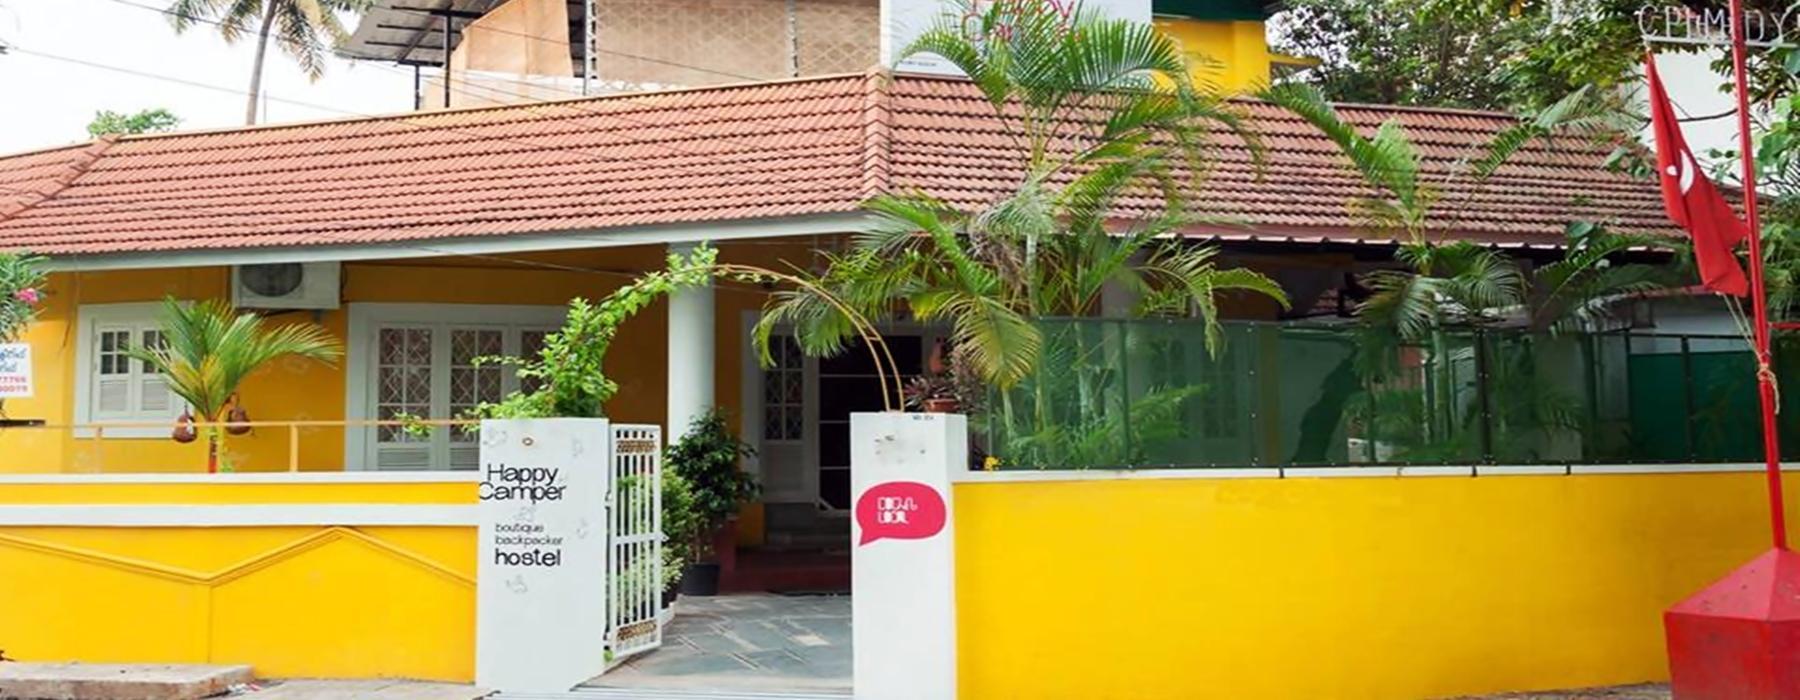 Backpacking Lodges in Kerala